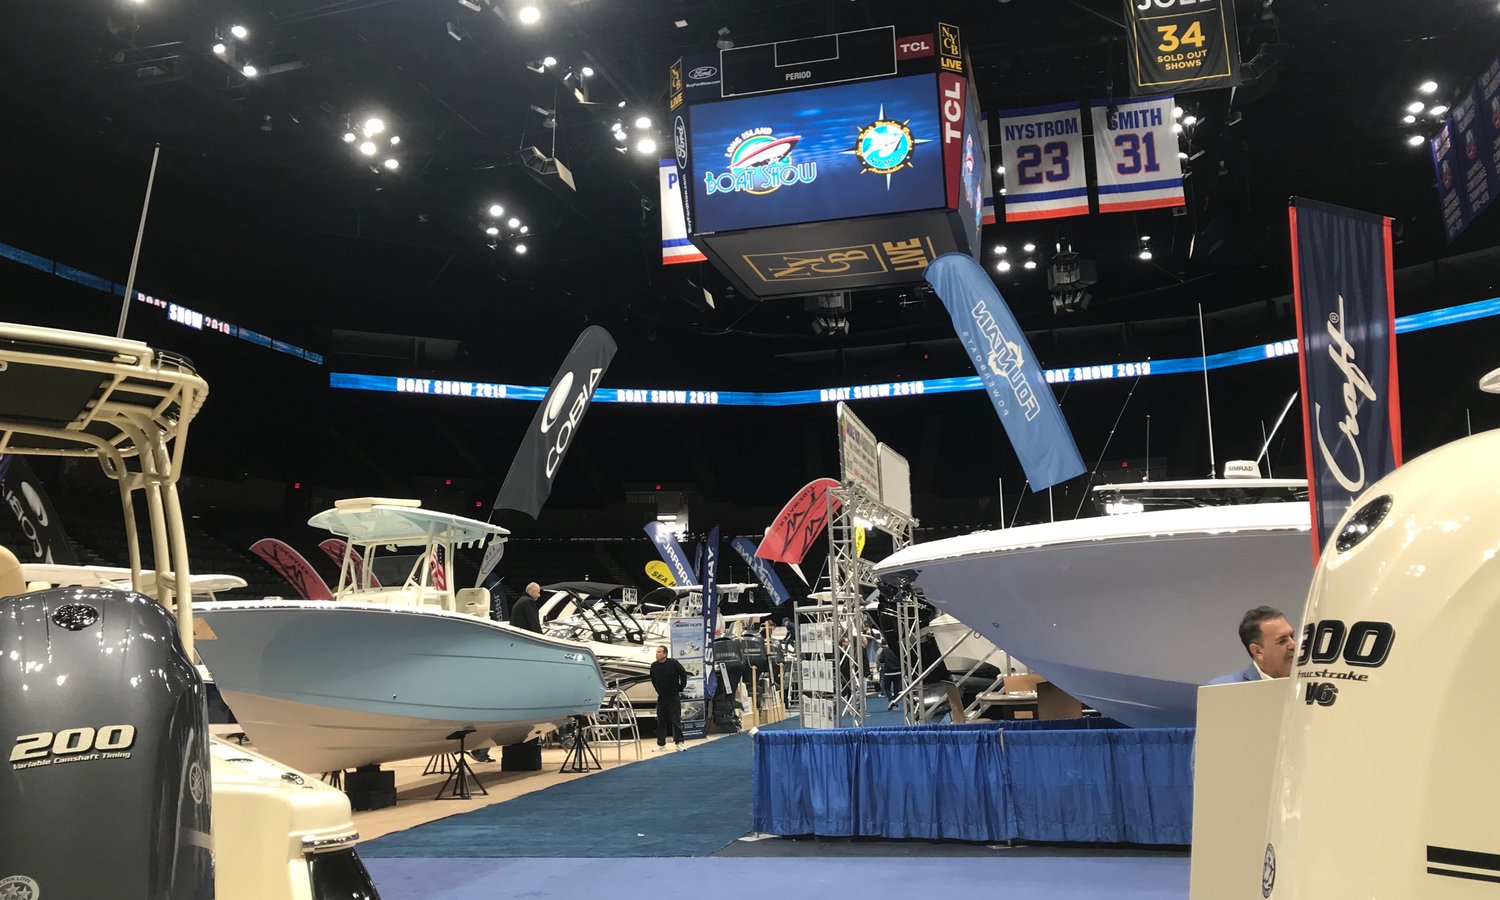 Long Island Boat Show returns to new Nassau Coliseum for 60th year